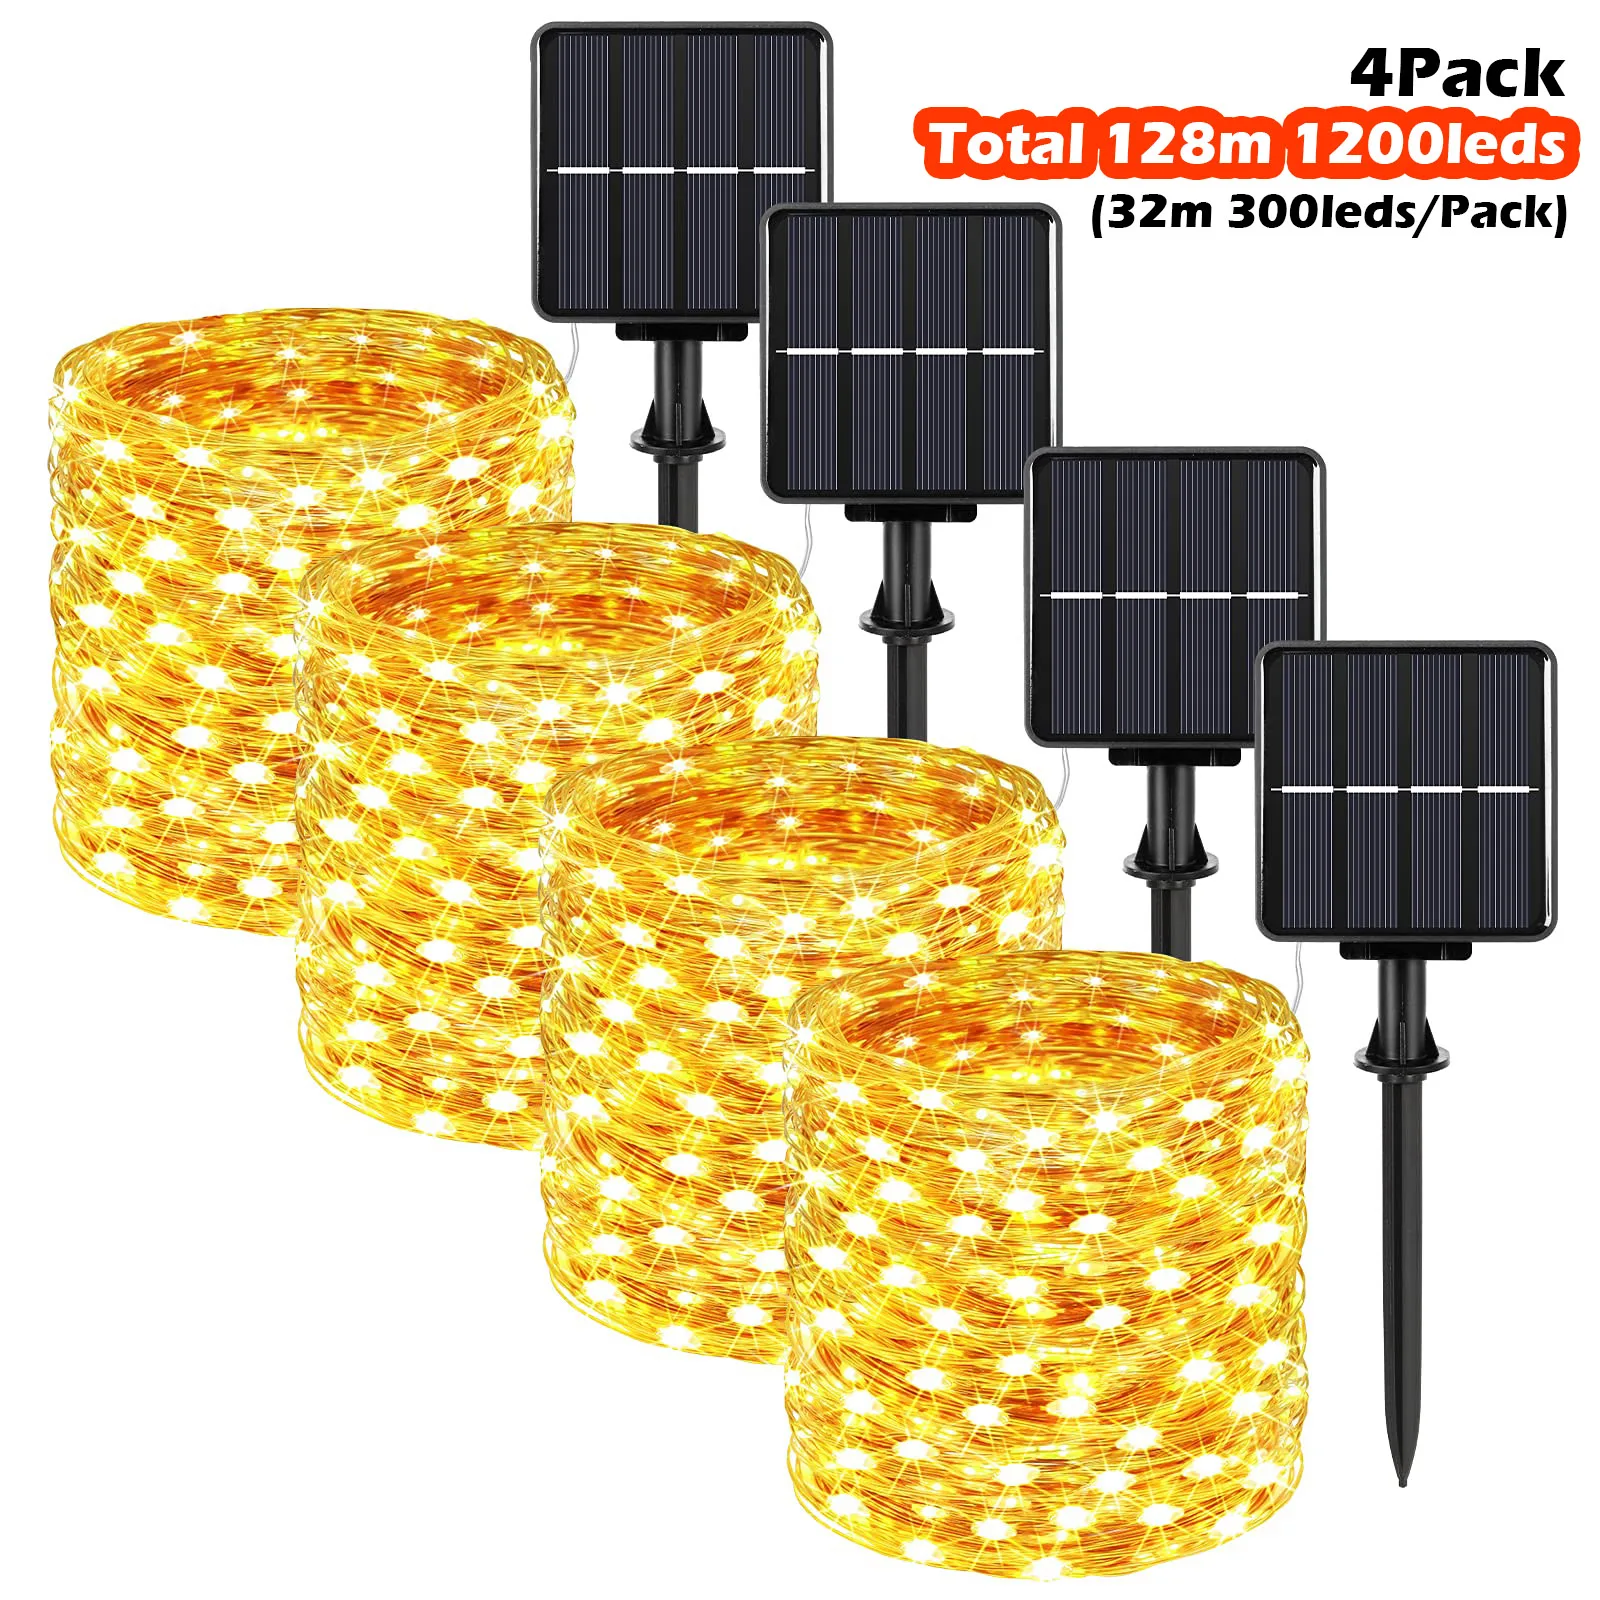 

4Pack Total 128m Solar Fairy String Lights 1200 LED Outdoor Twinkle Lights Waterproof 8 Modes Silver Wires for Tree Garden Party